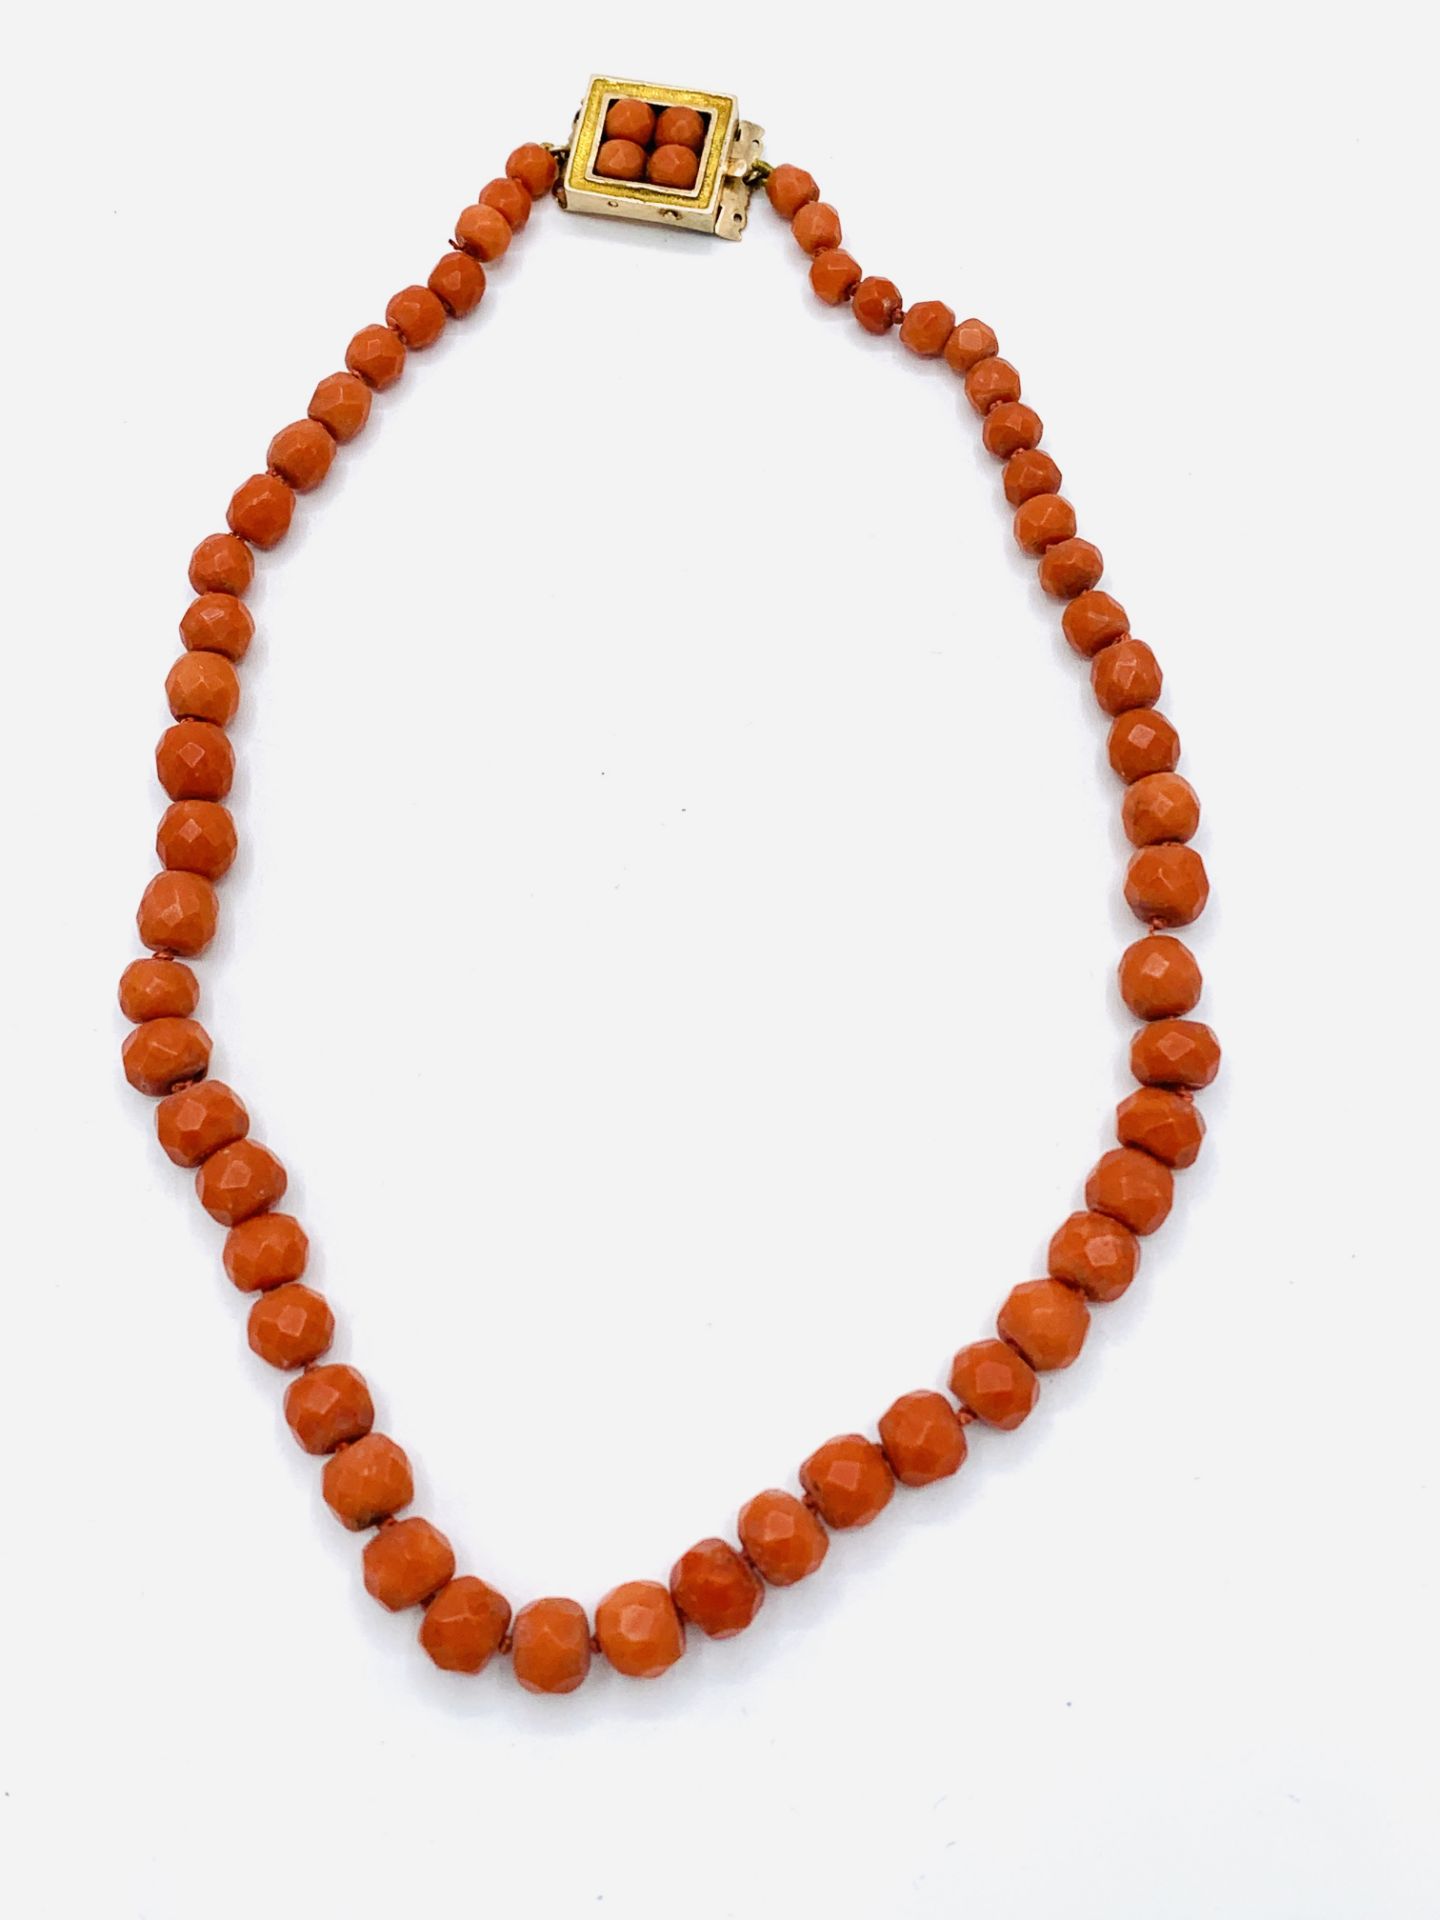 Graduated coral bead necklace